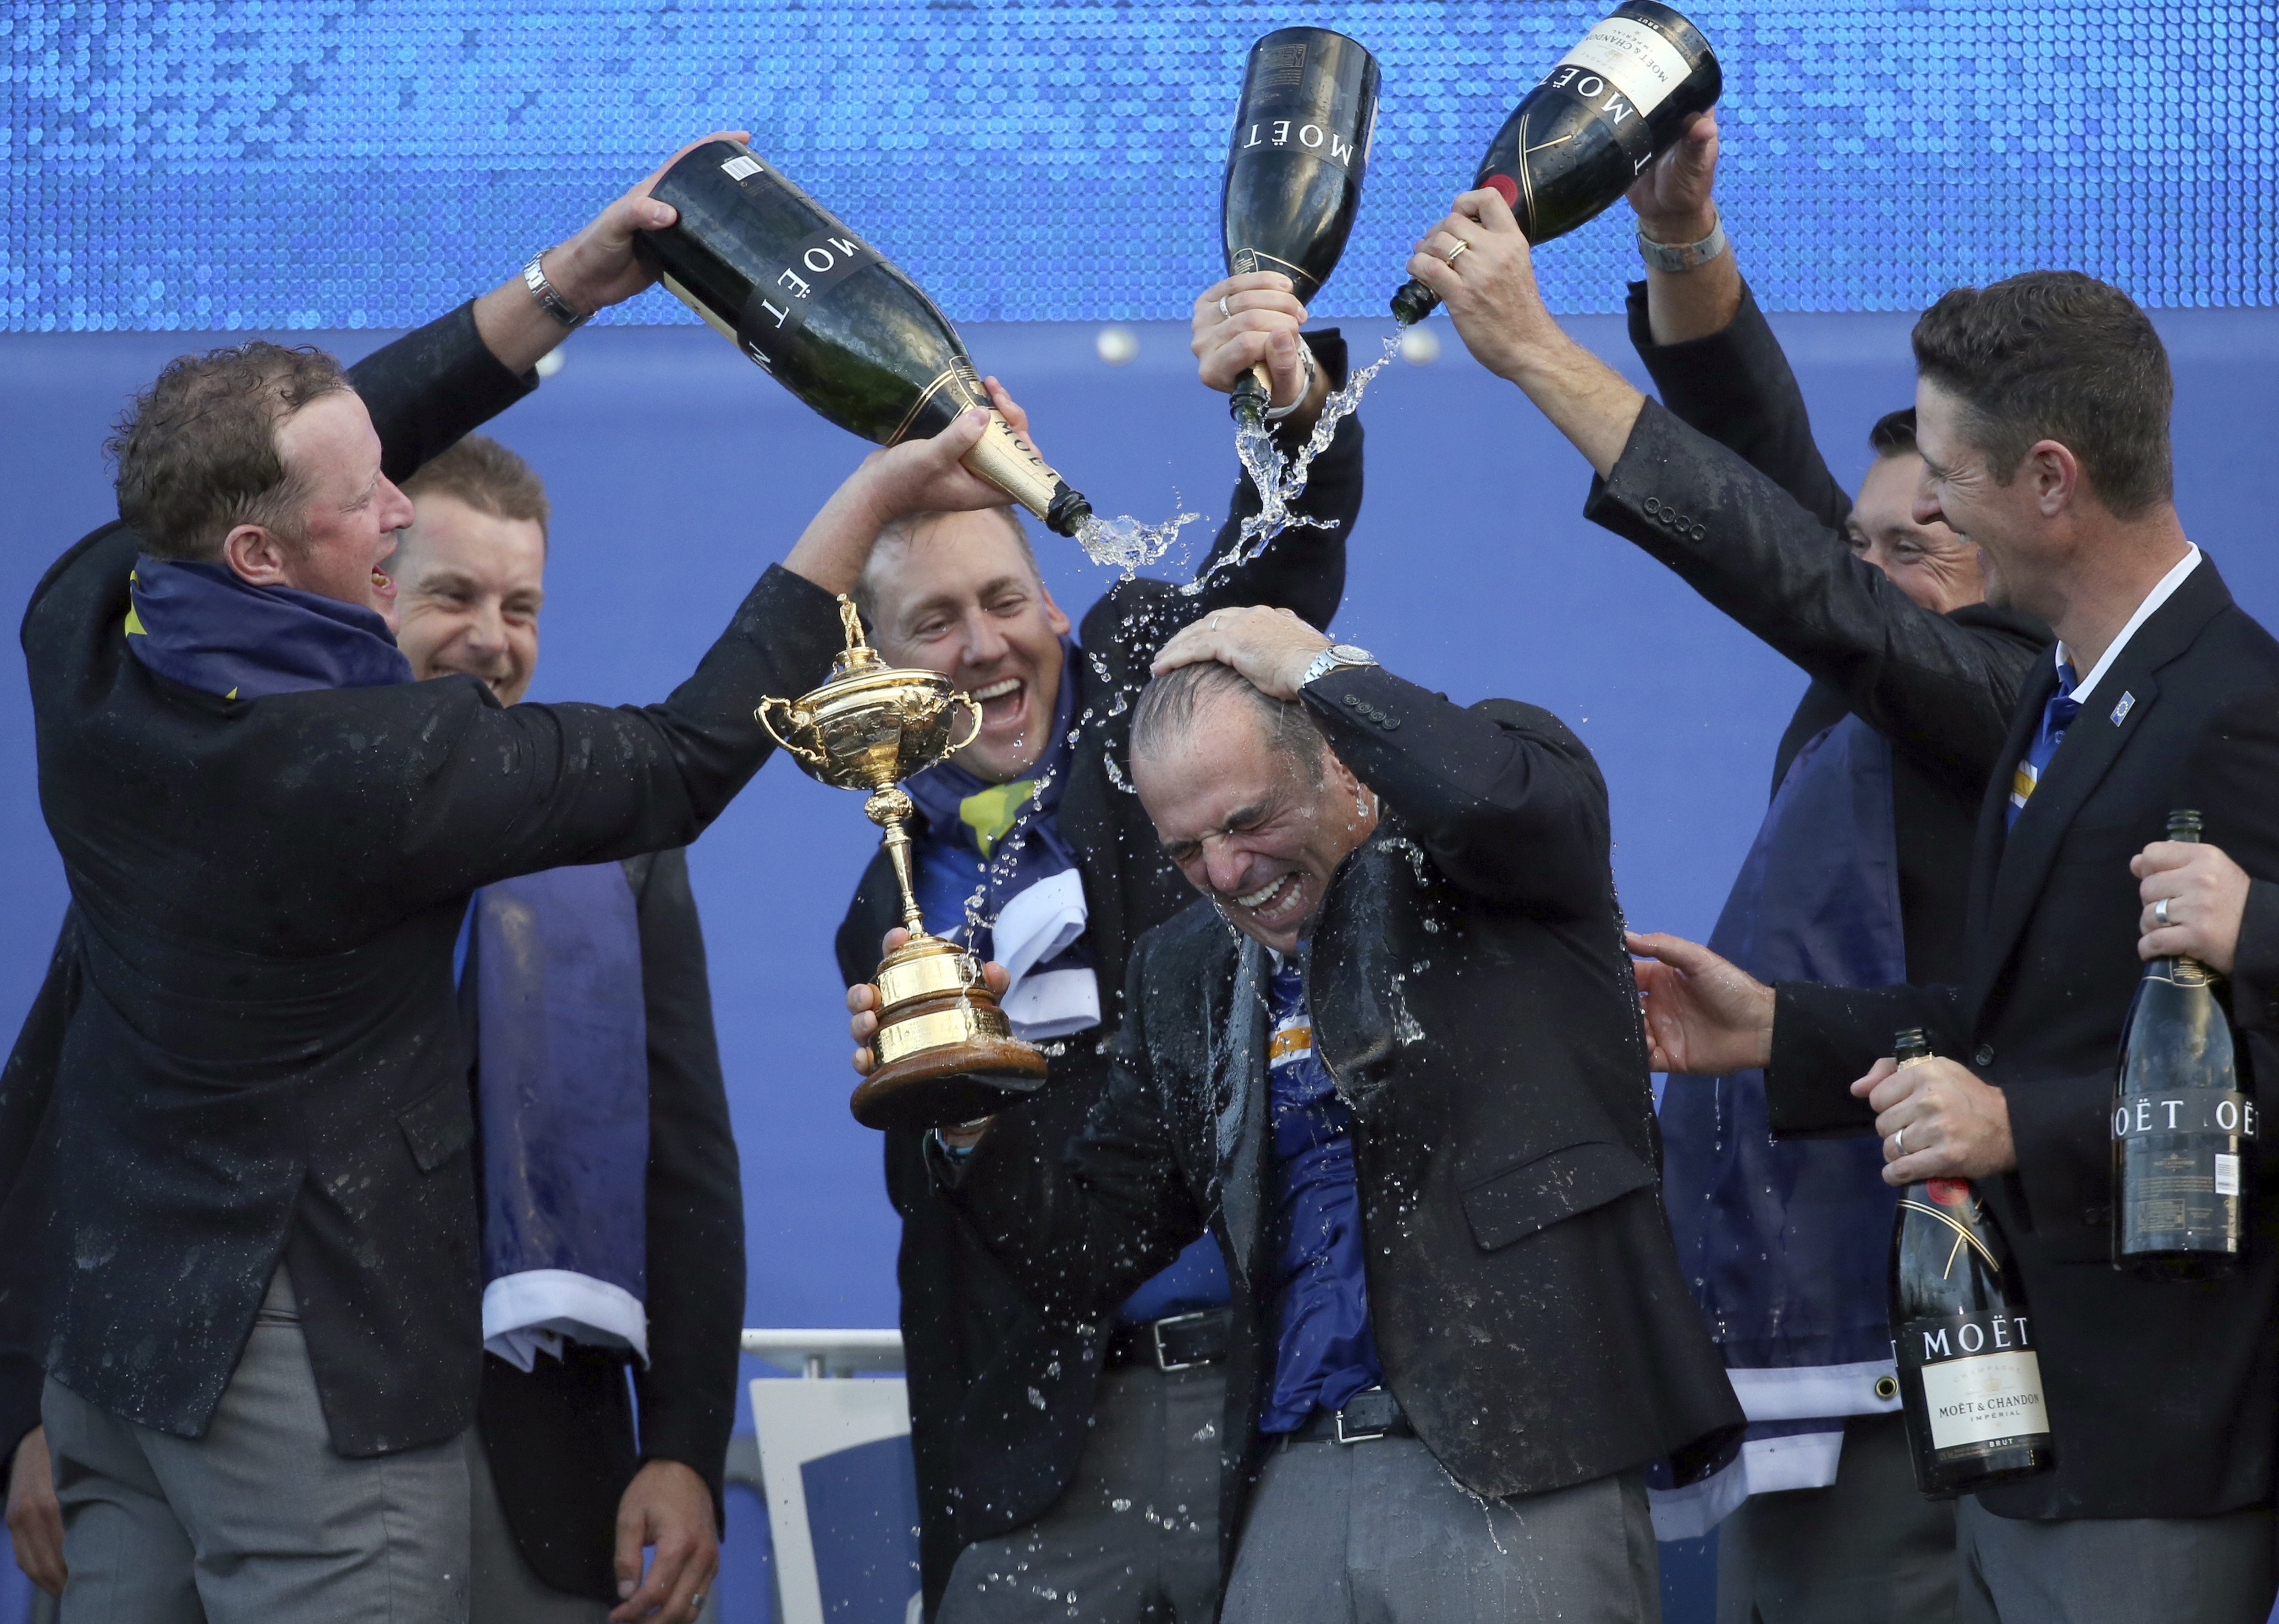 FILE - In this Sunday, Sept. 28, 2014 file photo, from left, Europe's players Jamie Donaldson, Henrik Stenson, Ian Poulter, Lee Westwood and Justin Rose pour champagne over captain Paul McGinley as they celebrate winning the 2014 Ryder Cup golf tournament, at Gleneagles, Scotland. Europe didn’t need to come from behind as it did in Medinah, Illinois, USA, two years ago to win its third Ryder Cup in a row. Soon after US golfer Phil Mickelson criticized his captain Tom Watson. (AP Photo/Scott Heppell, FIle)